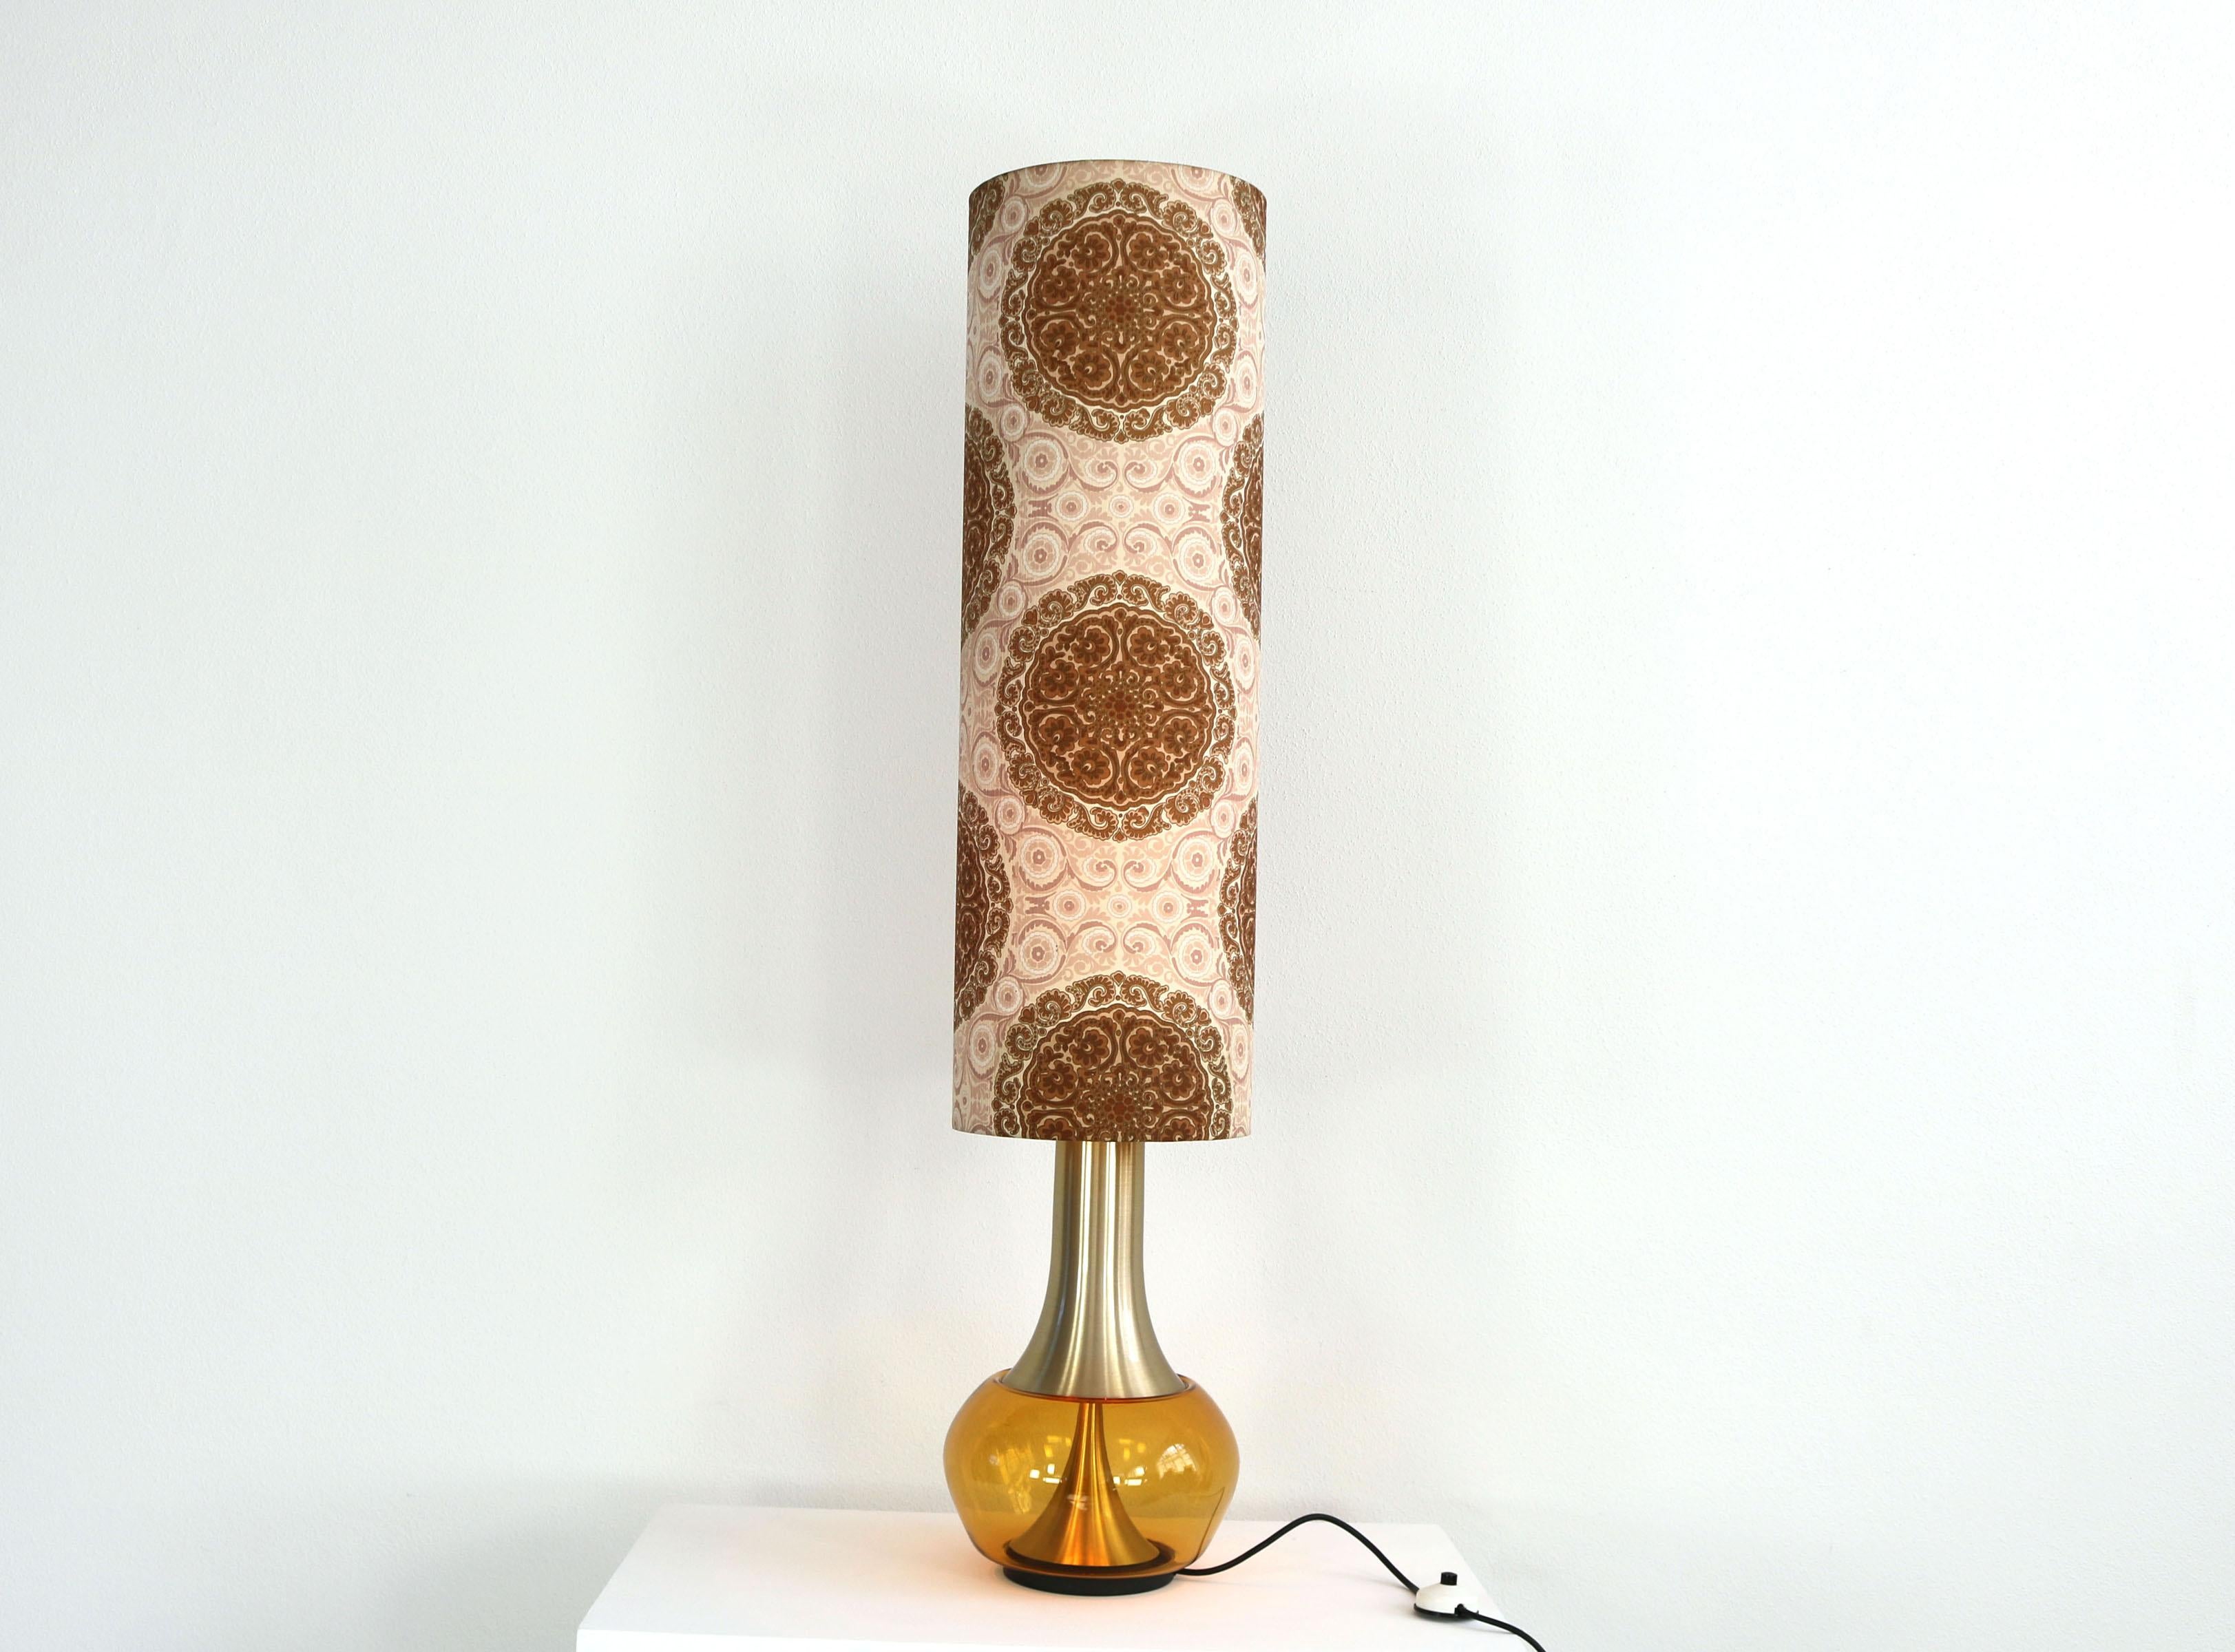 This floor lamp was made in the 70s. It consists of an illuminated glass base and a fabric shade with a floral pattern. The lamp can be switched separately in 3 ways - base only, shade only or both together. Manufacturer: Doria, Germany.